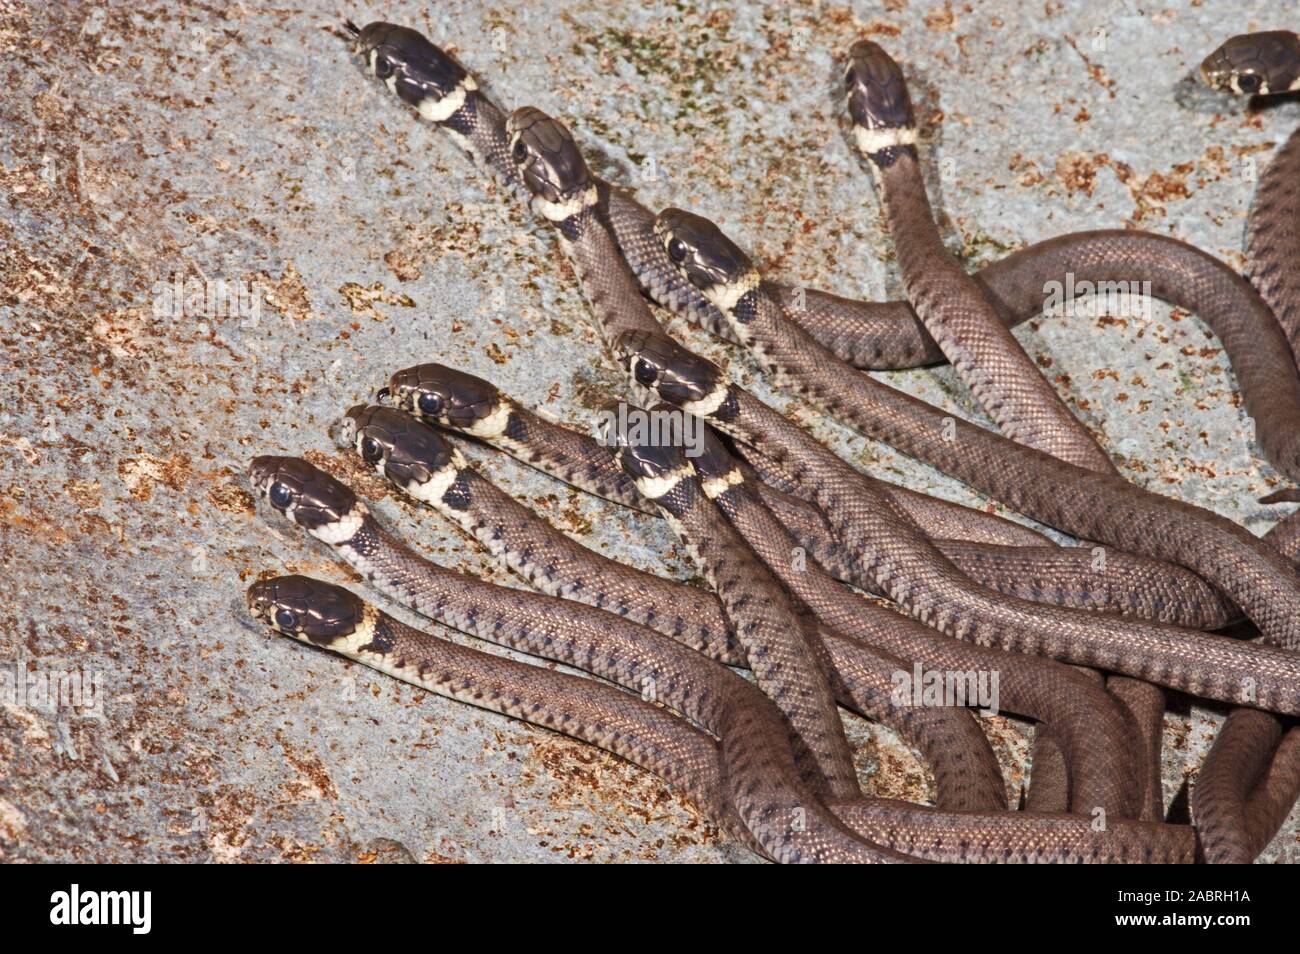 GRASS SNAKE (Natrix natrix). Young, juvenile, hatchlings, dispersing  from nest site area. A survival strategy. Stock Photo